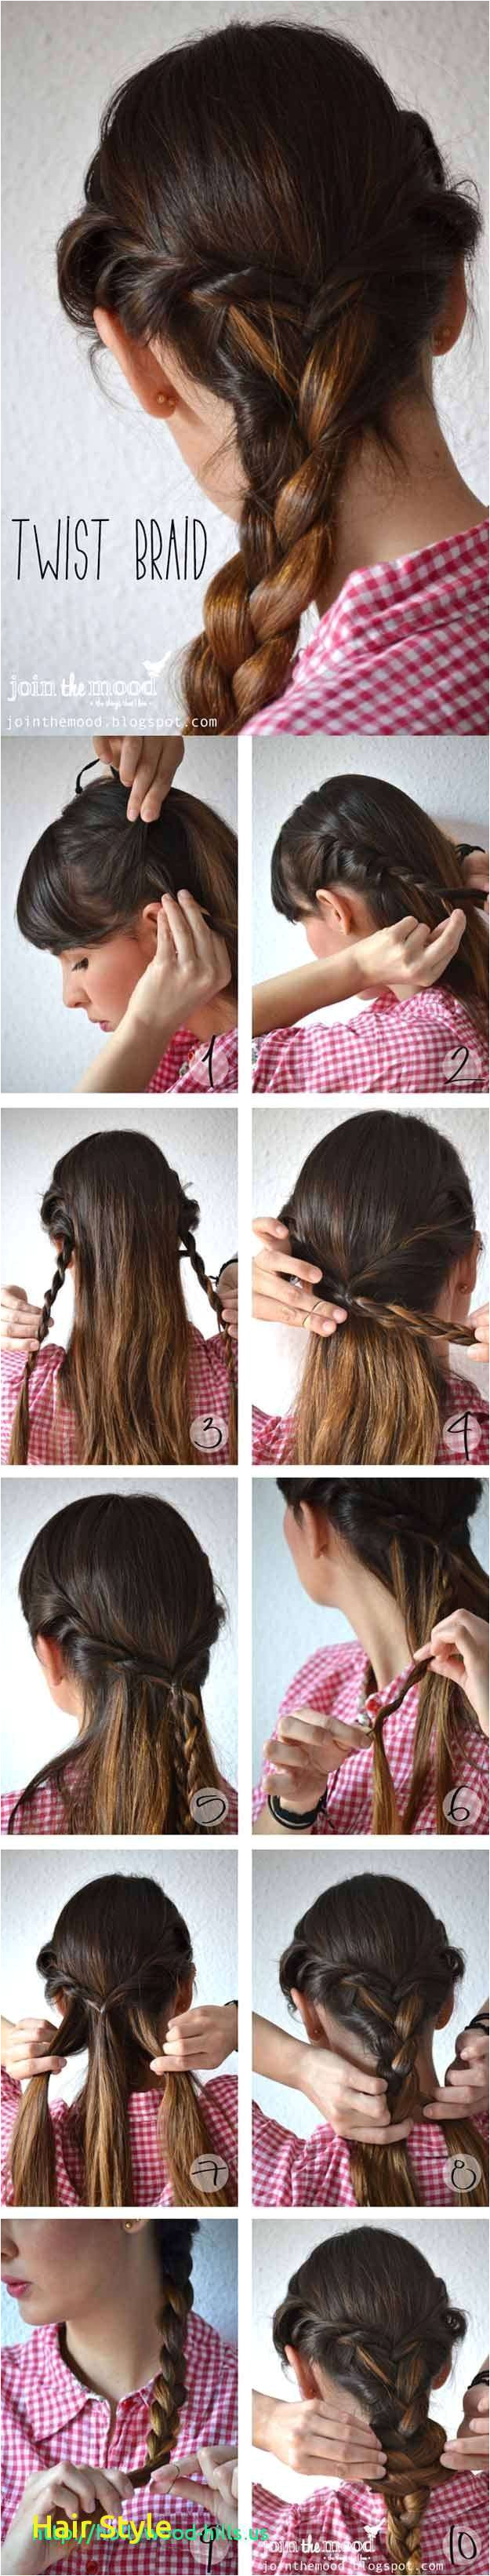 cute 5 minute hairstyles for curly hair new 9089 best easy hairstyles images on pinterest of